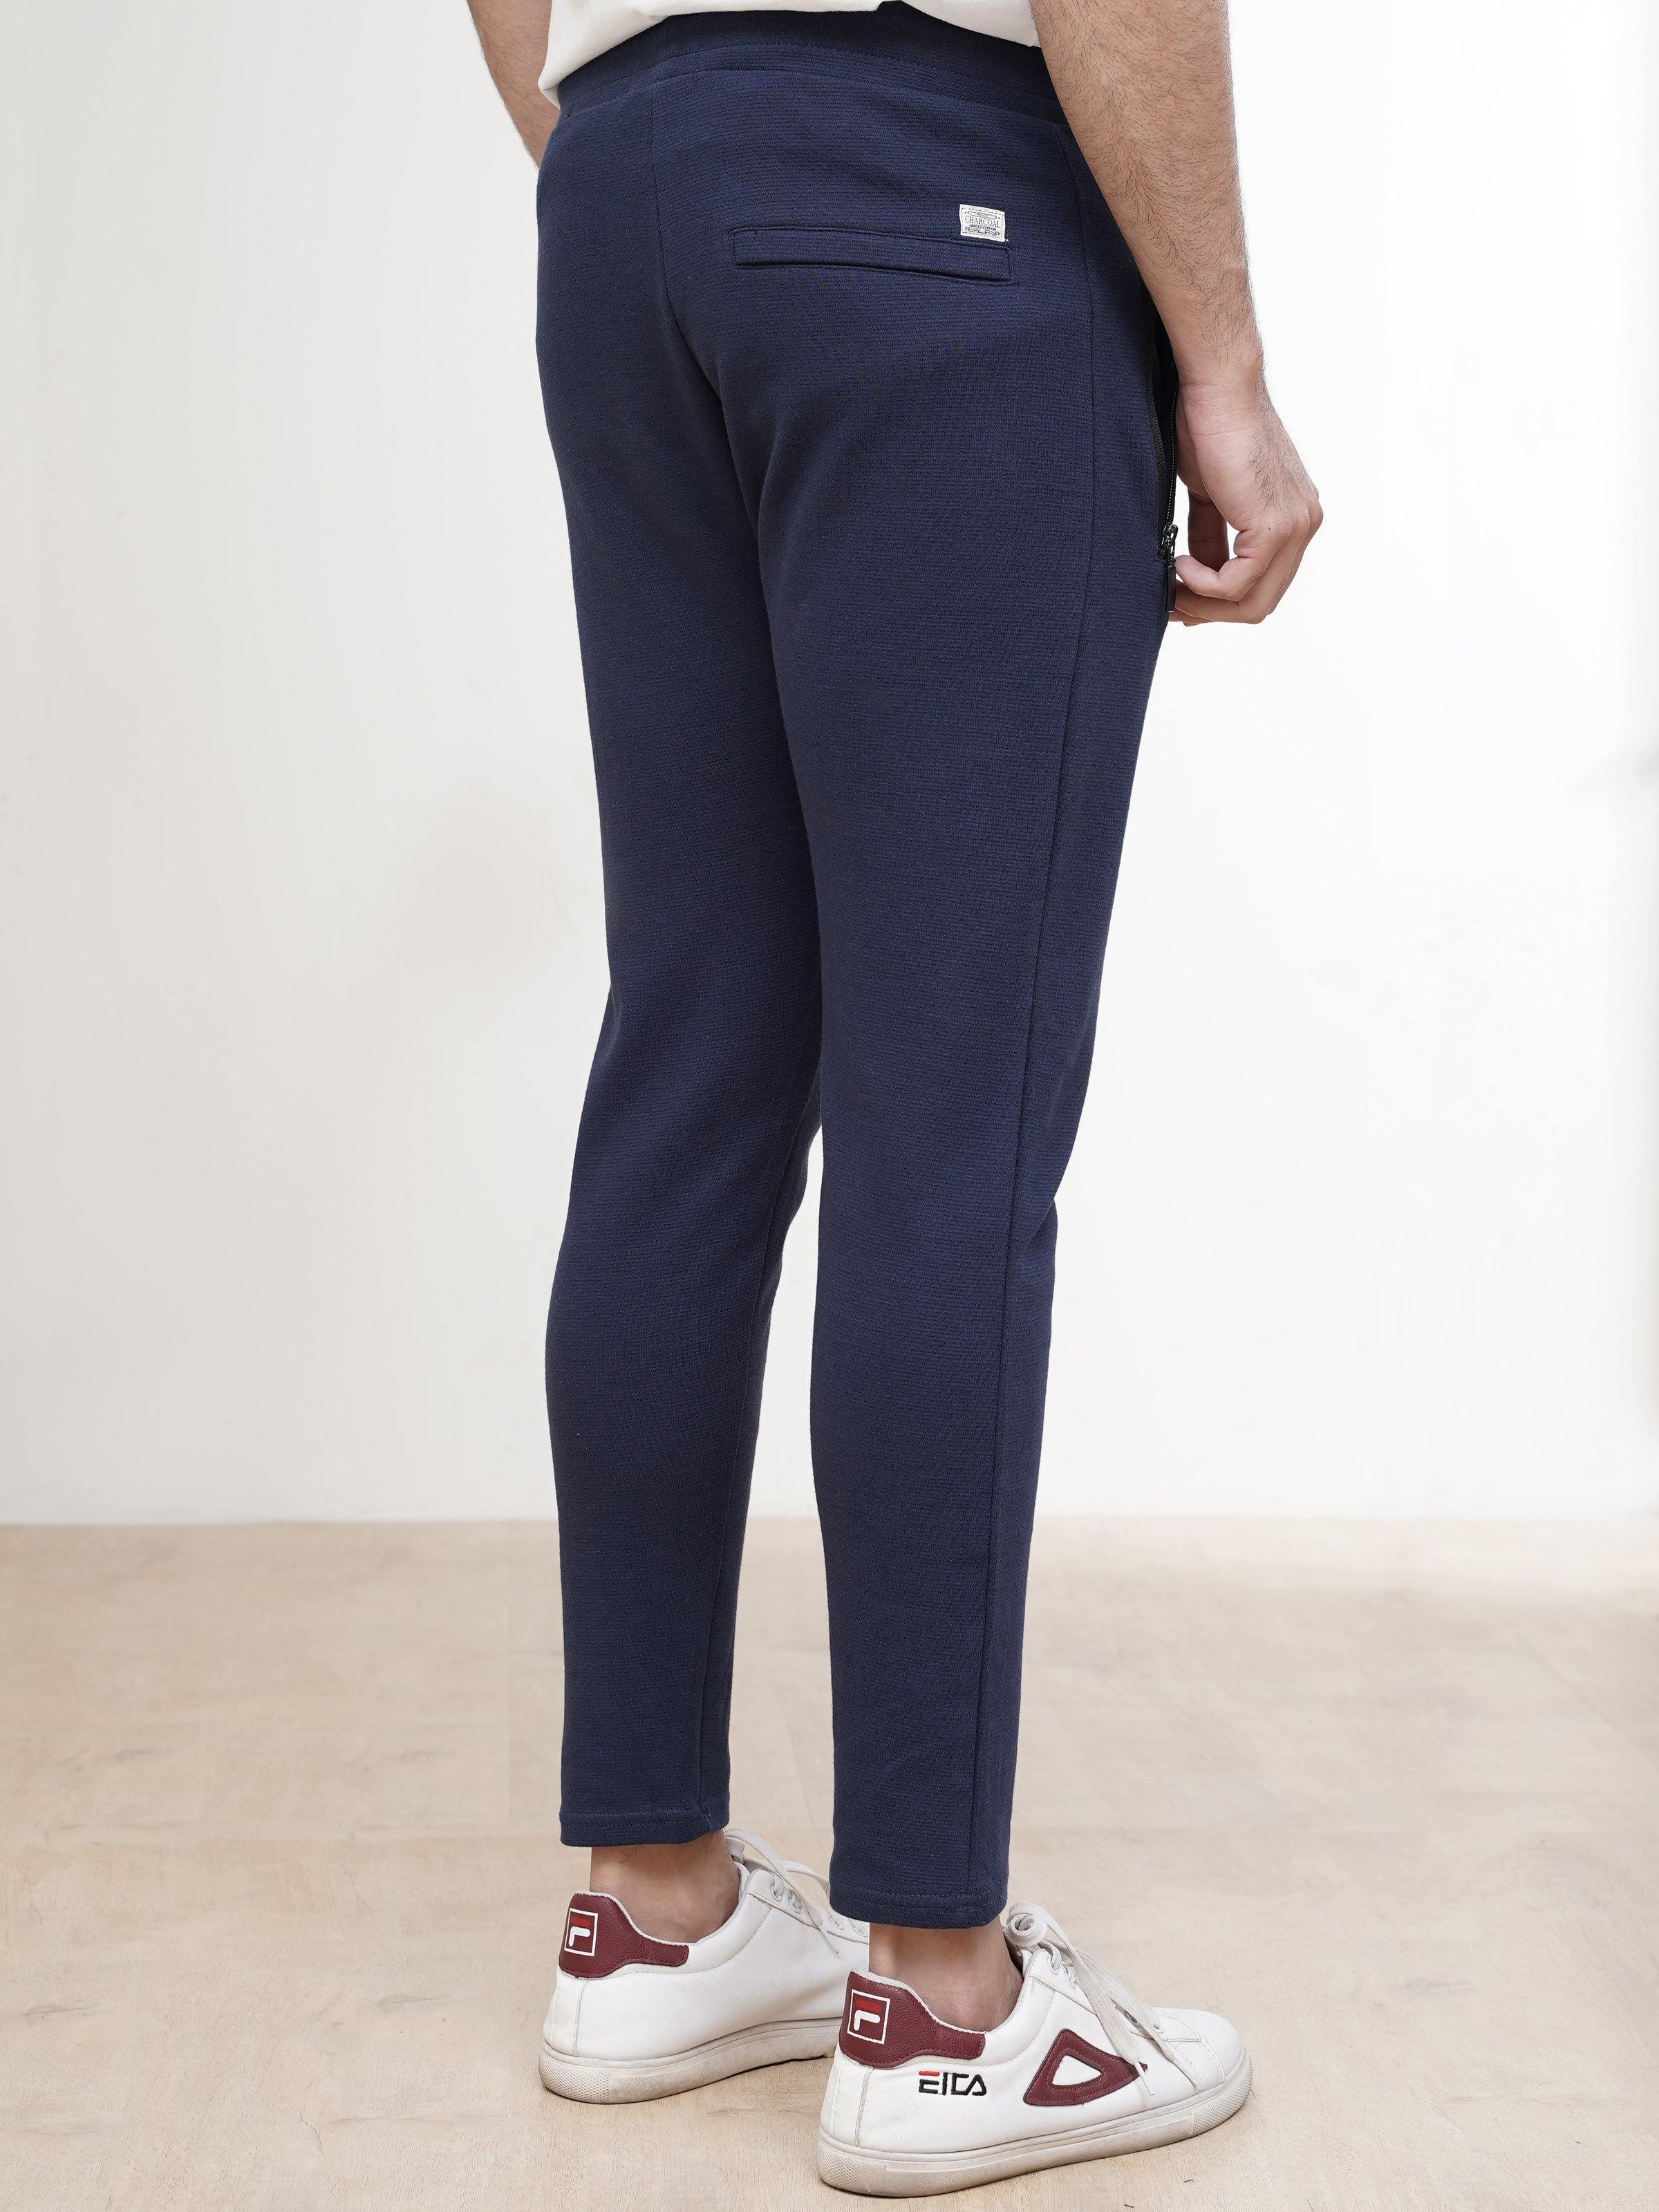 OTTOMAN JOGGER TROUSER DARK BLUE at Charcoal Clothing